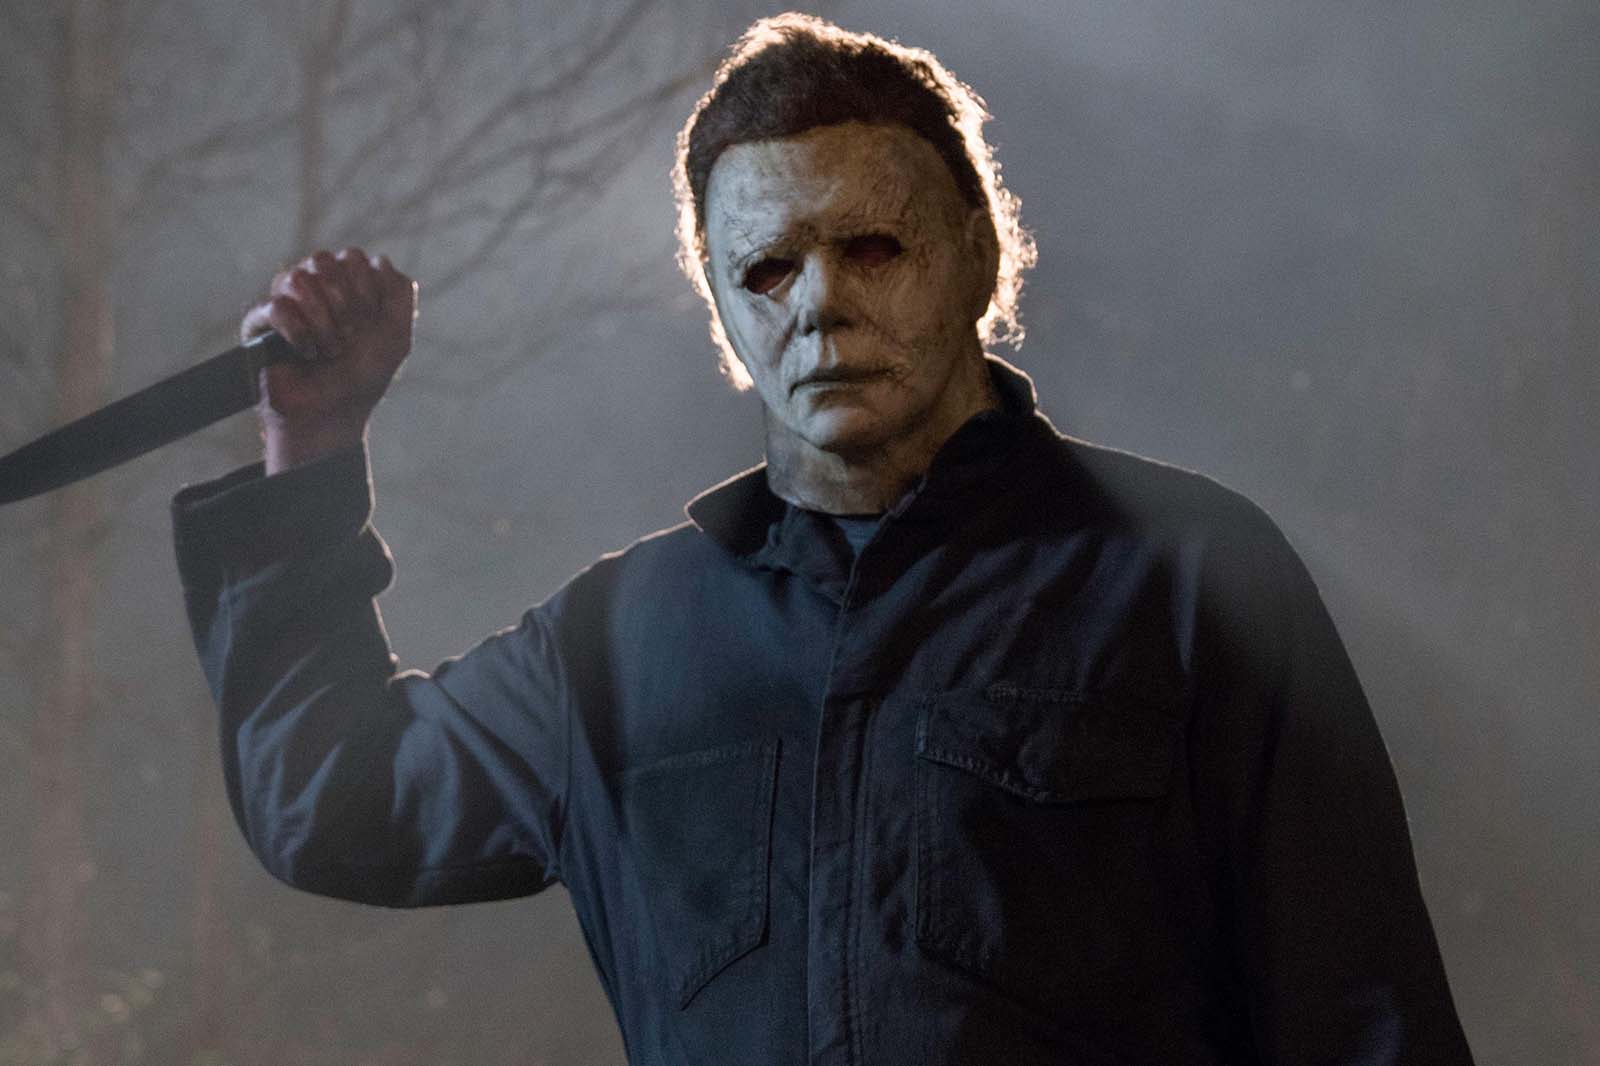 Watch ‘Halloween Kills’ Full Movie Online Free Streaming At Home